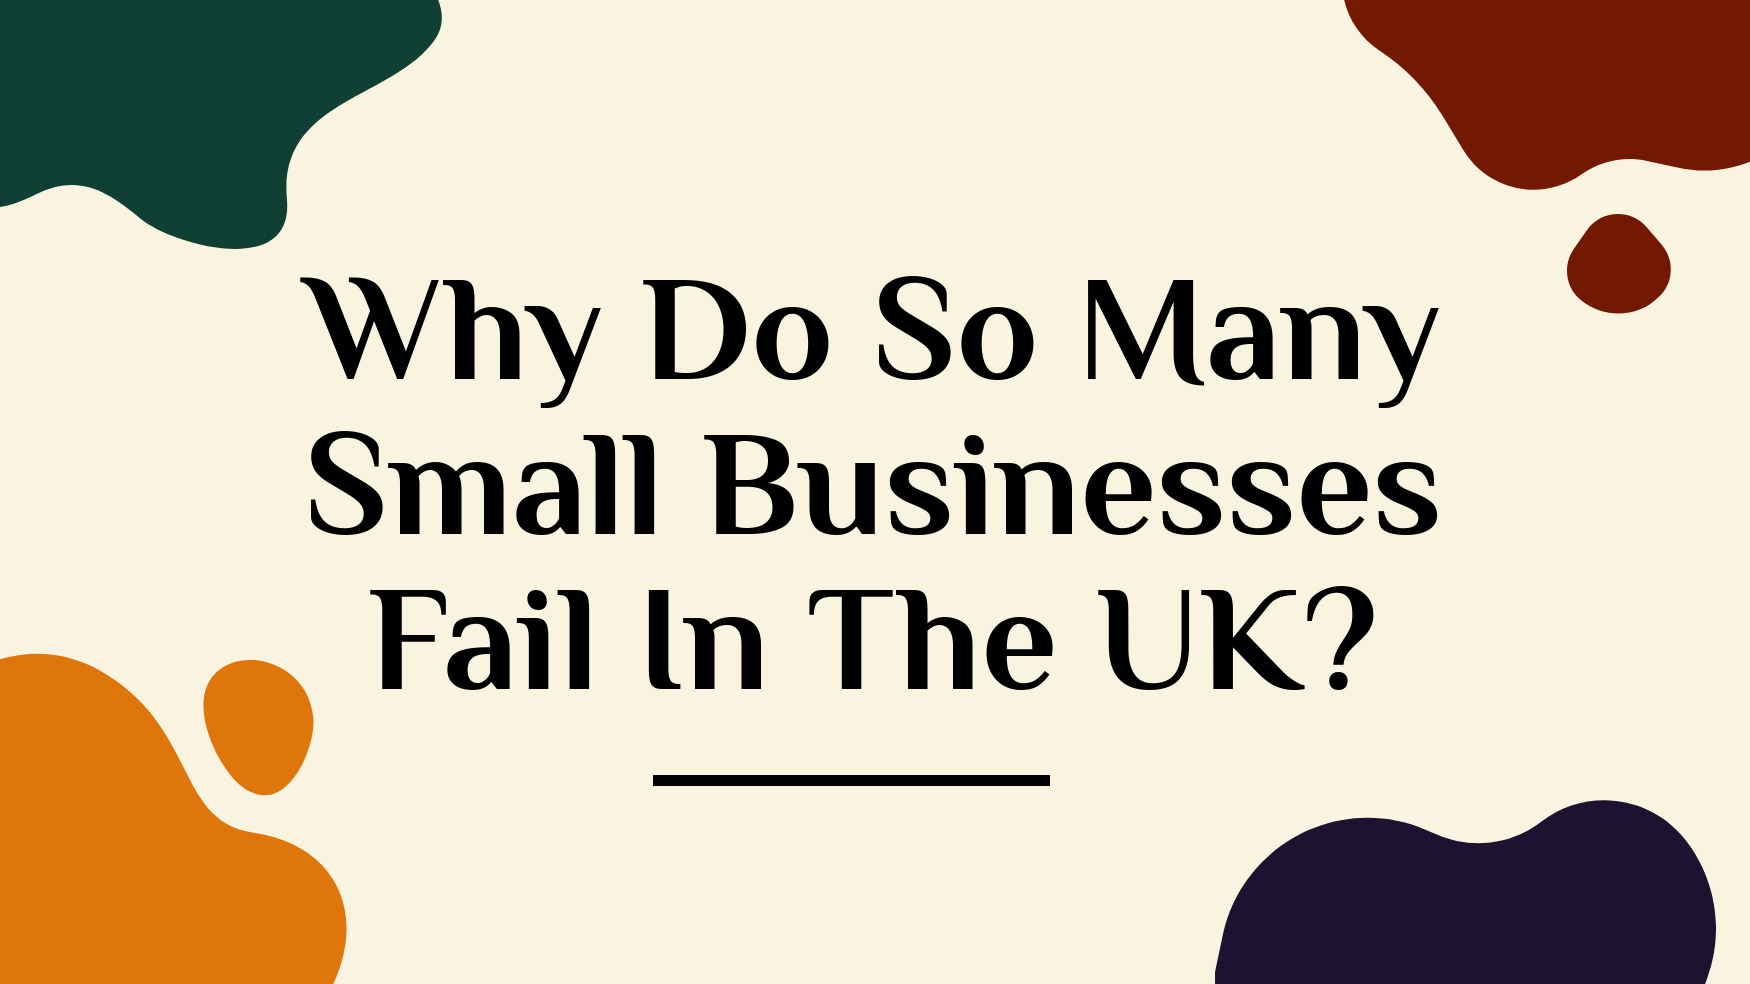 Small Business Marketing Tips to Avoid Failure In The UK